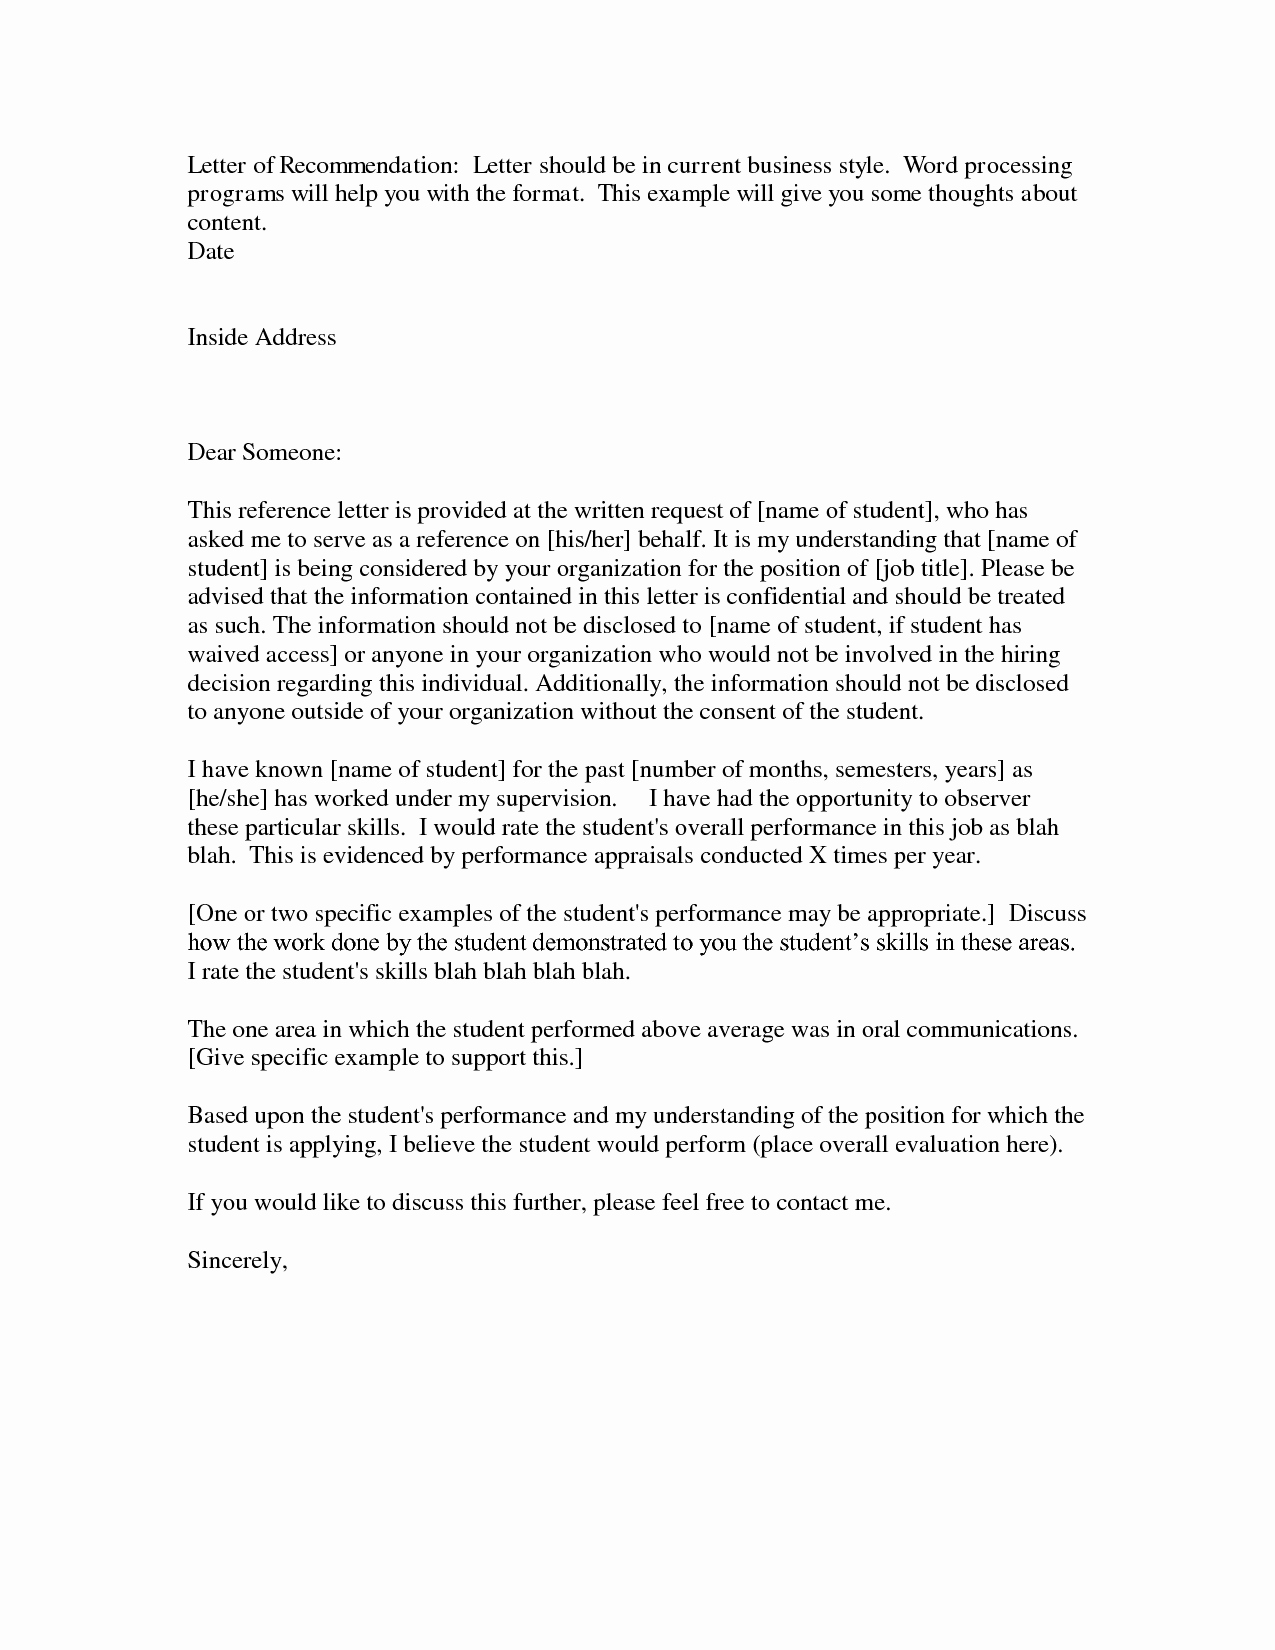 Sample Professional Letter Of Recommendation New Business Reference Letter Template Example Mughals